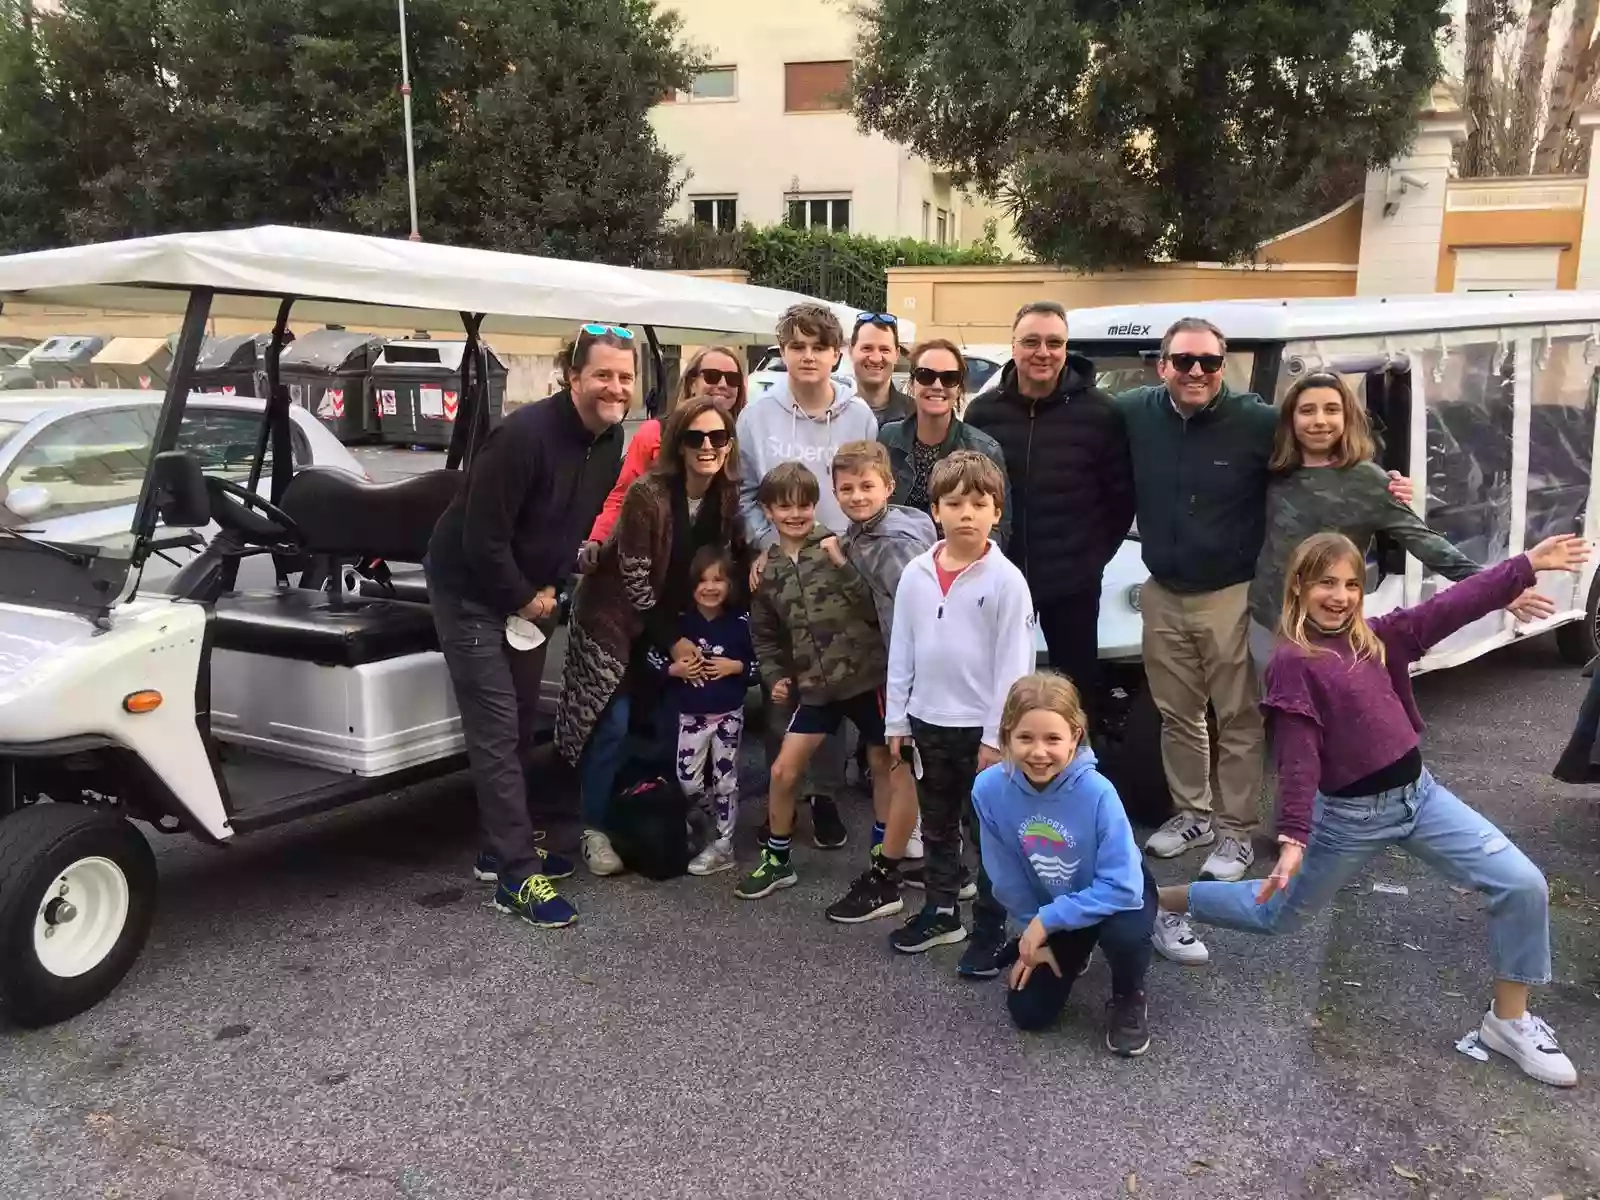 Rome in Golf Cart - Tours of Rome